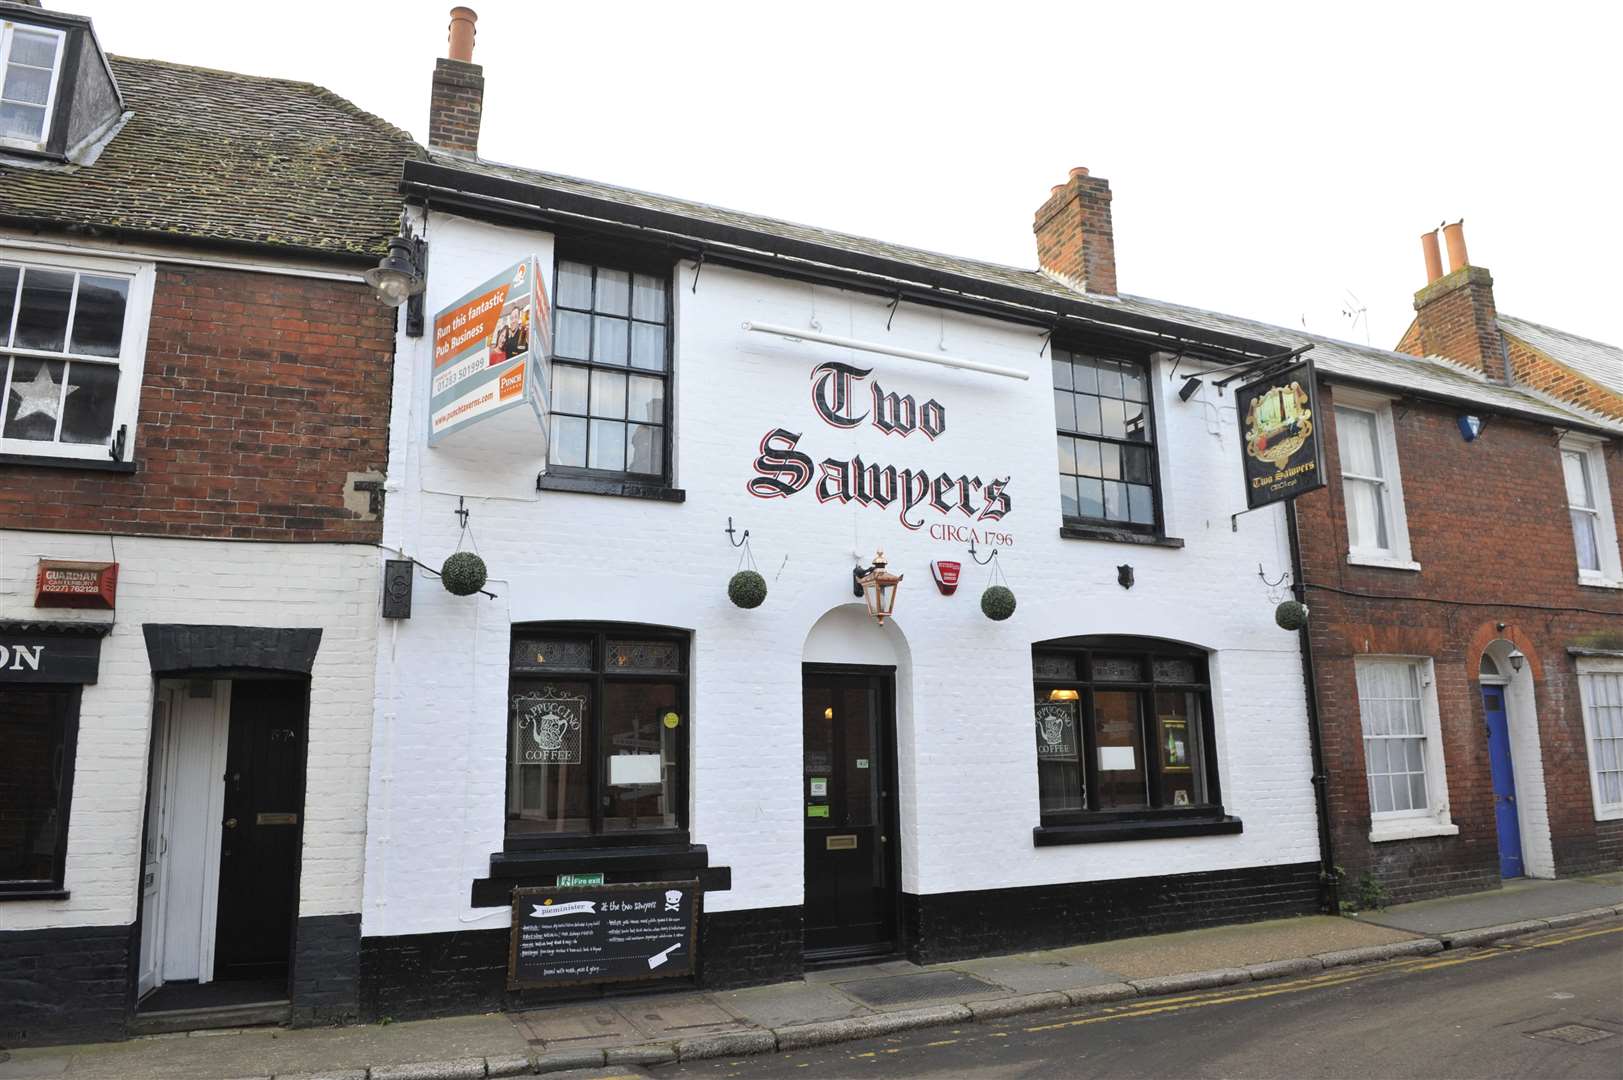 Tony and Bob were regulars at Canterbury pub the Two Sawyers before the pandemic